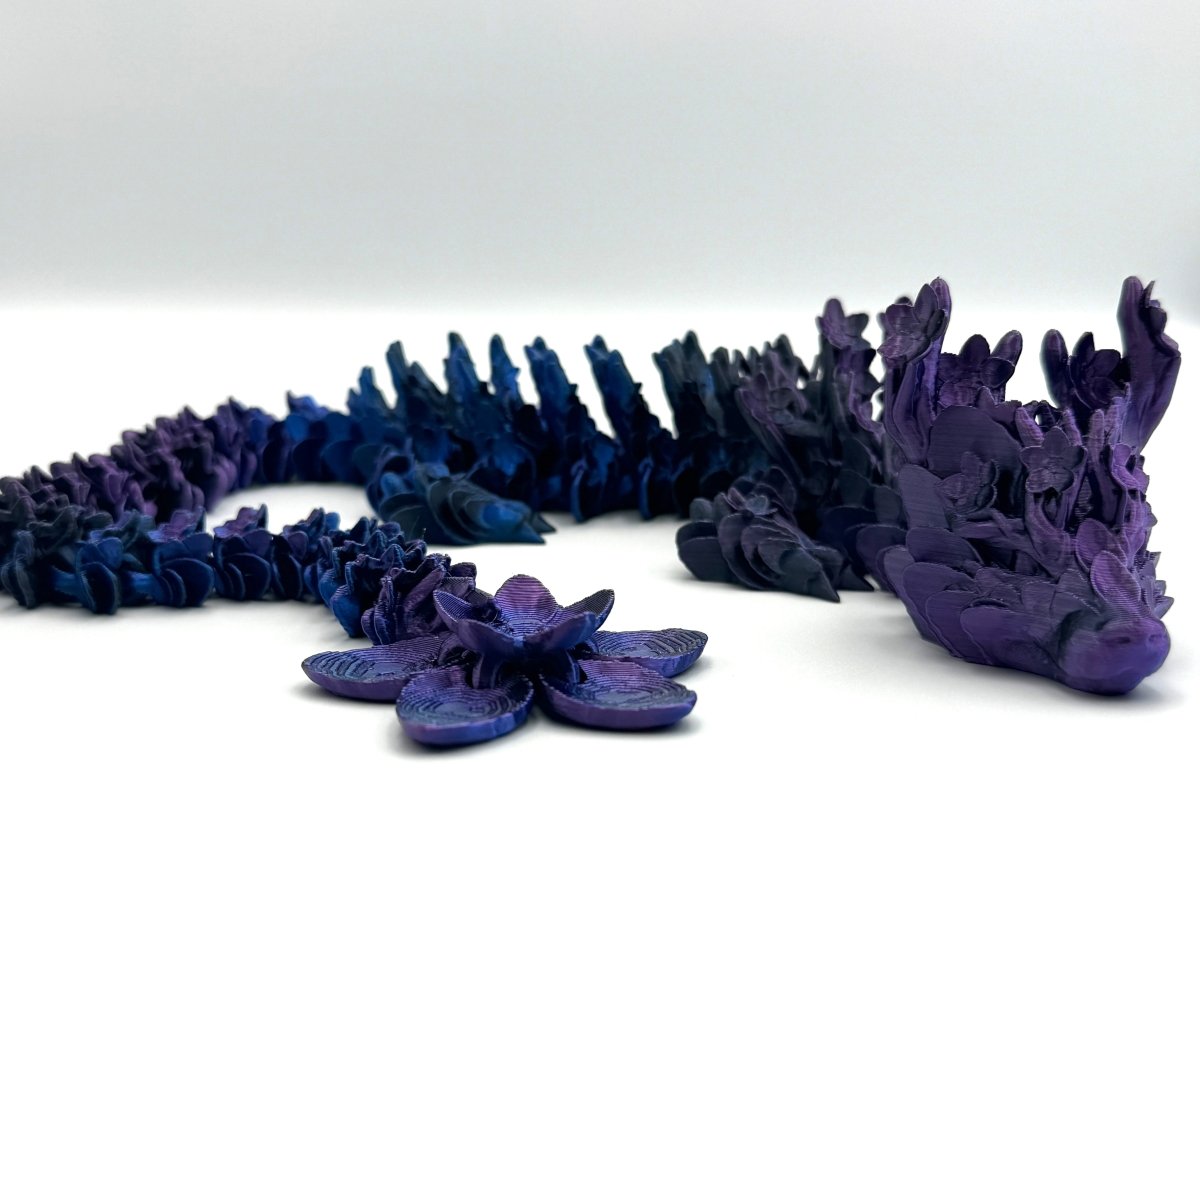 Cherry Blossom Dragon: Exquisite 22" 3D Printed Flexible Cherry Blossom Dragon - Cosmic Chameleon